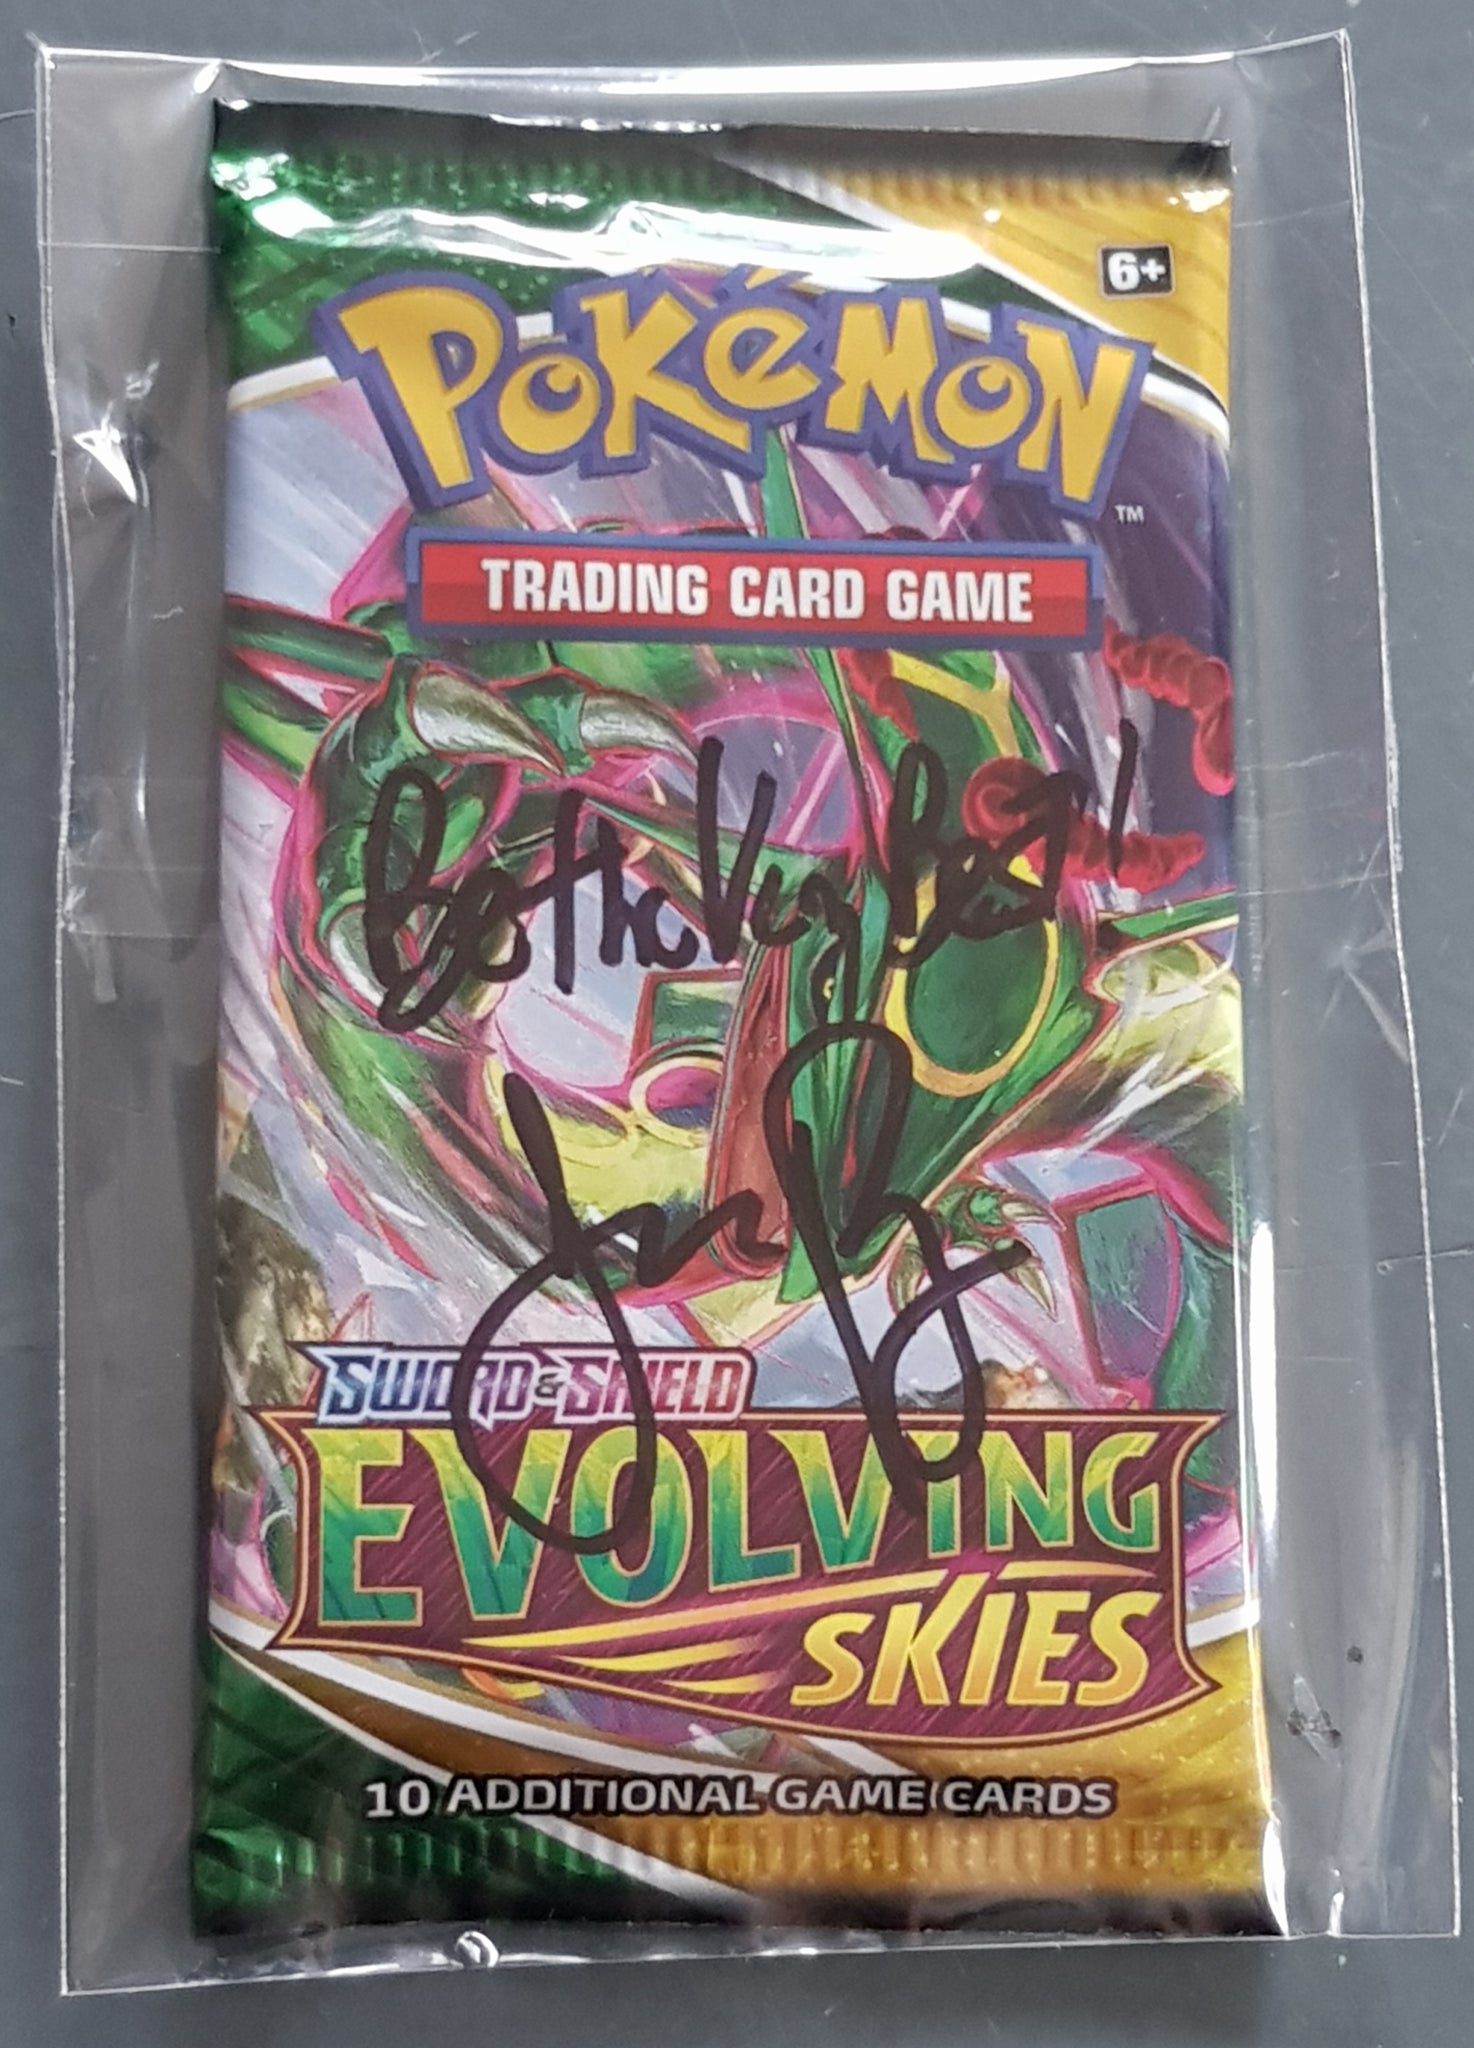 Pokemon Evolving Skies Sealed Trading Card Booster Pack (Signed by Jason Paige)